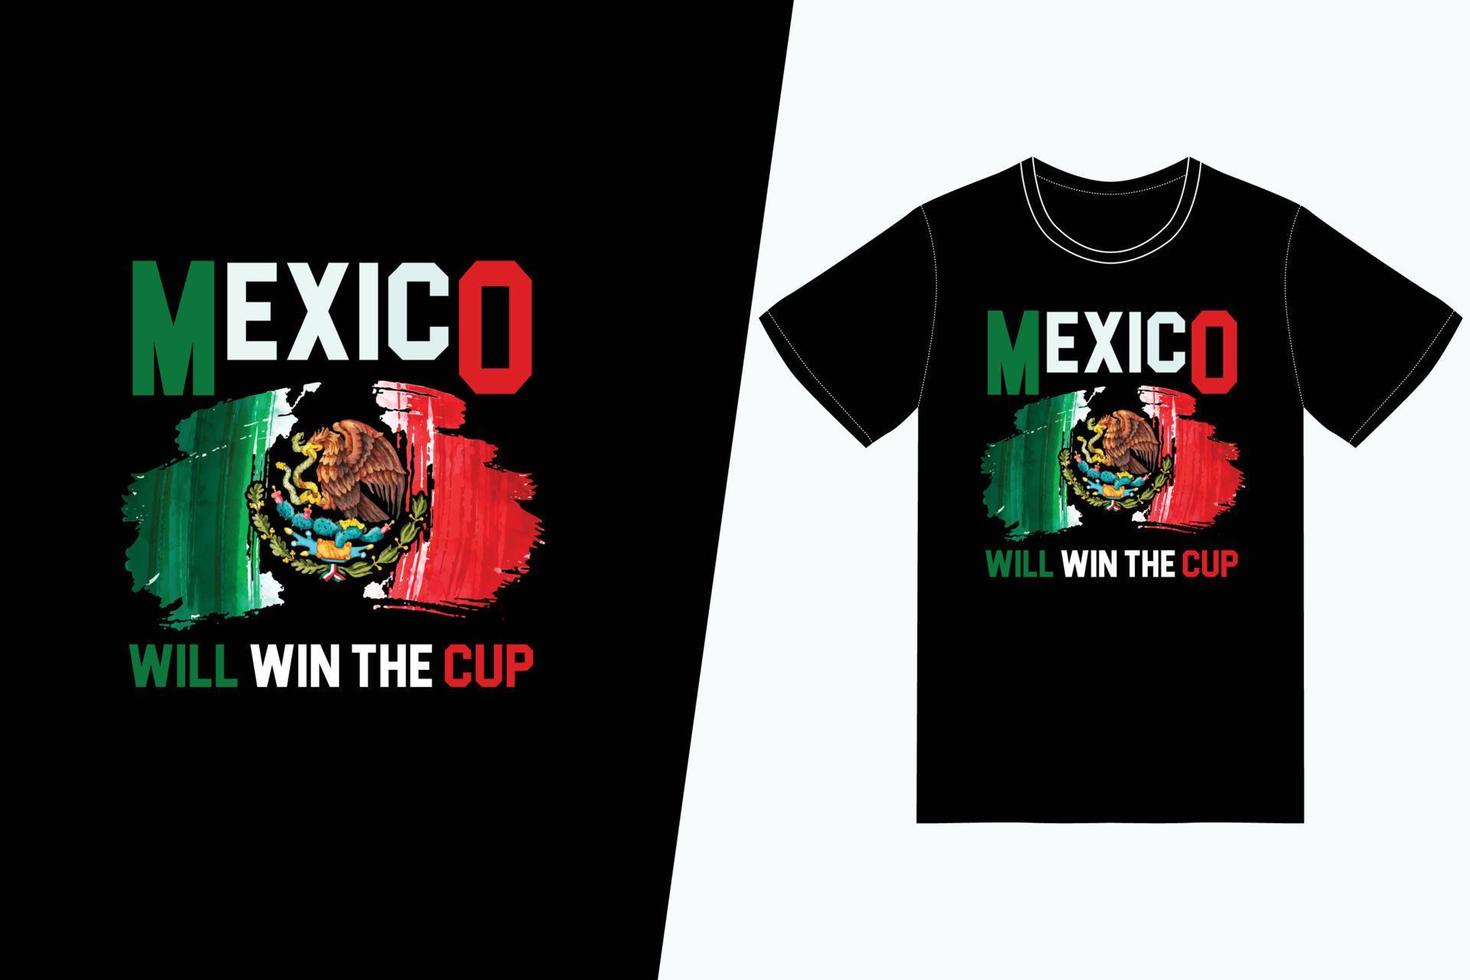 Mexico will win the cup Fifa Soccer design. Fifa Soccer t-shirt design vector. For t-shirt print and other uses. vector